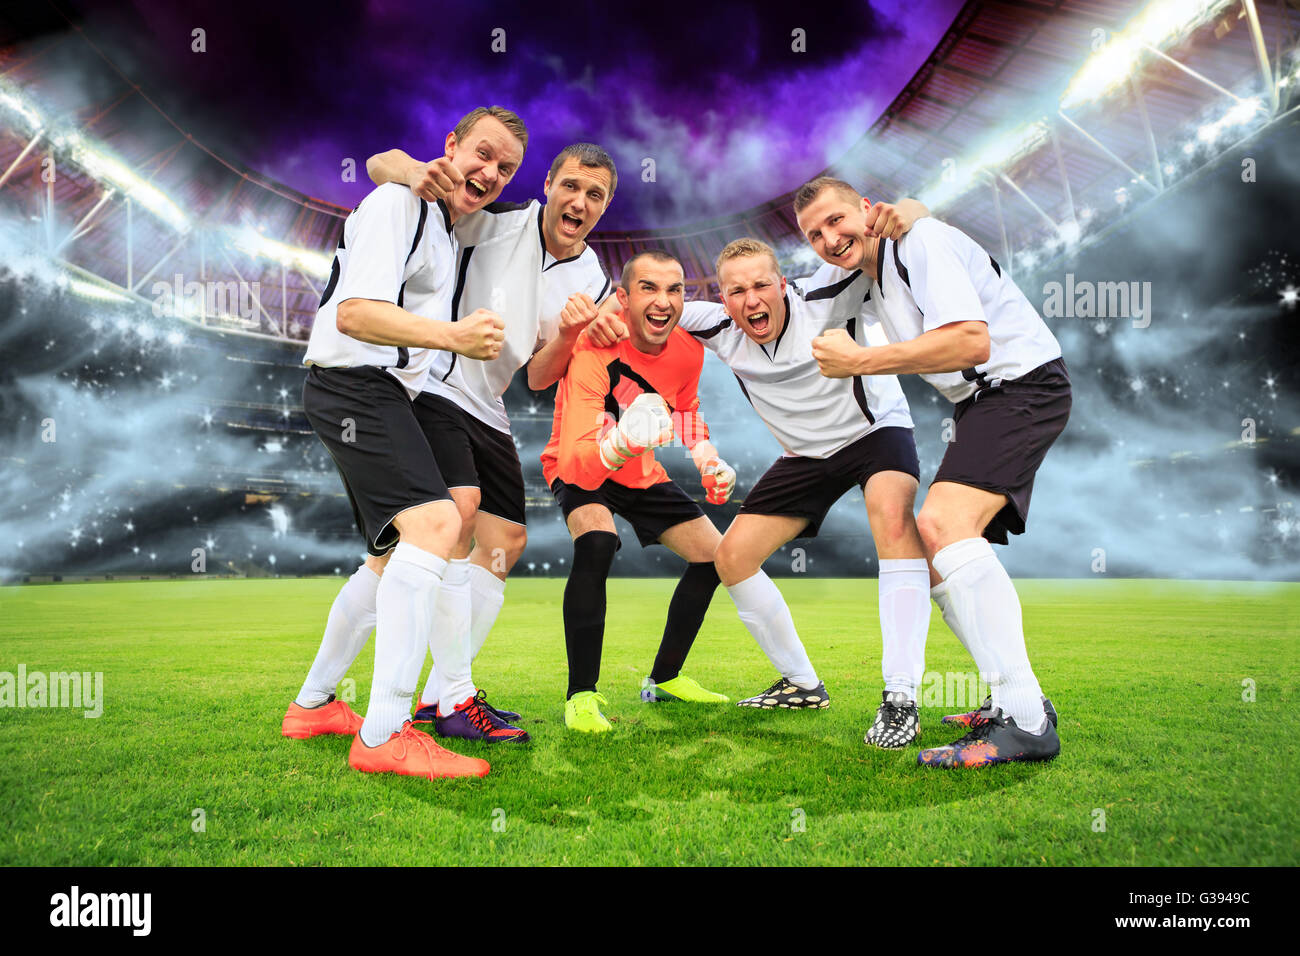 scenes from a soccer or football game with cheering male player Stock Photo